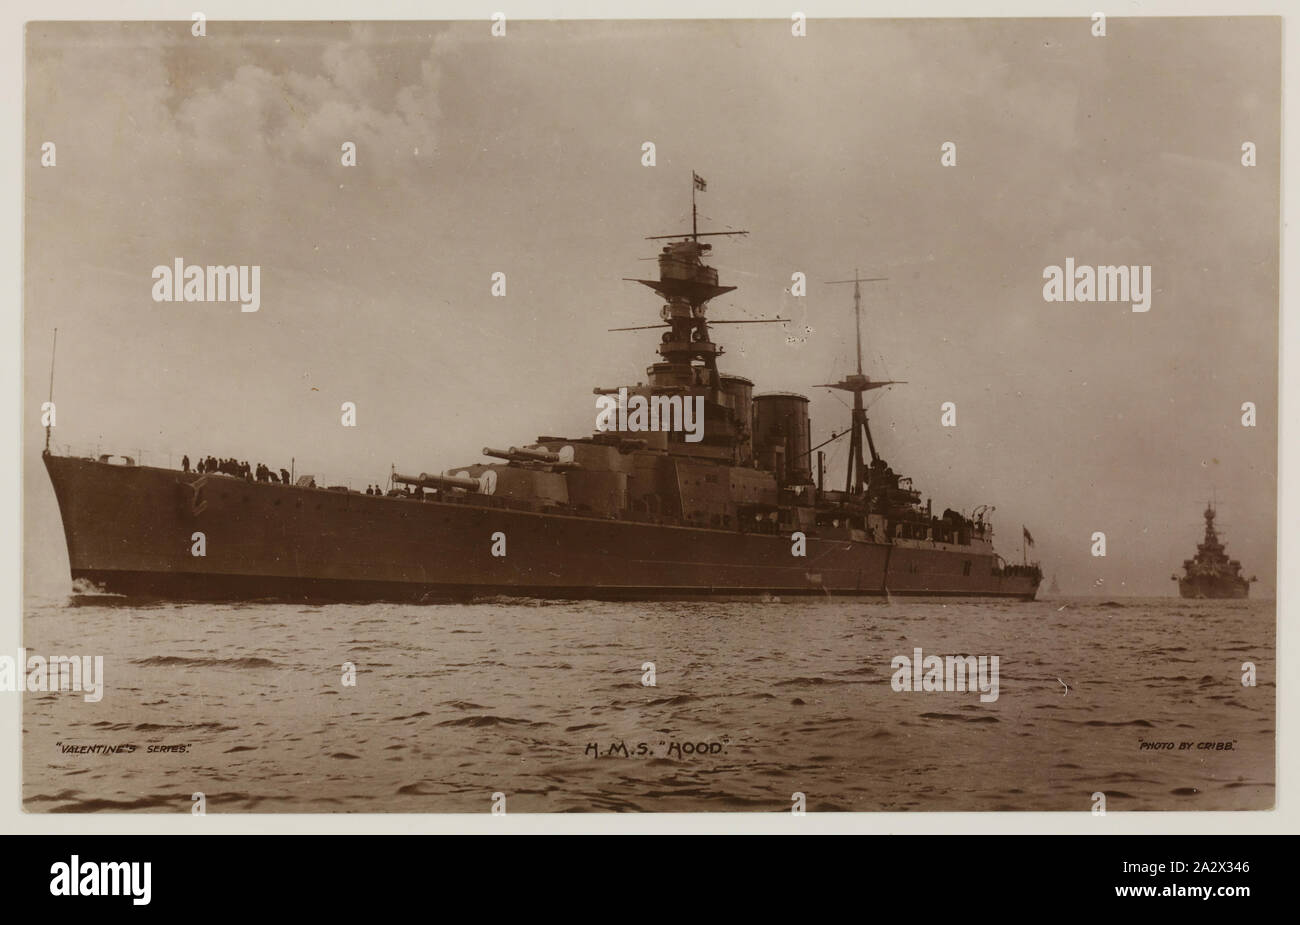 Photograph - 'H.M.S Hood', Able Seaman David Ralph Goodwin, World War II, 1939-1948, Photograph of HMS Hood during World War II. One of 32 black and white photographs, some in the form of postcards, relating to the military service of David Ralph Goodwin, Ex H.M.A.S. Association (Vic Stock Photo